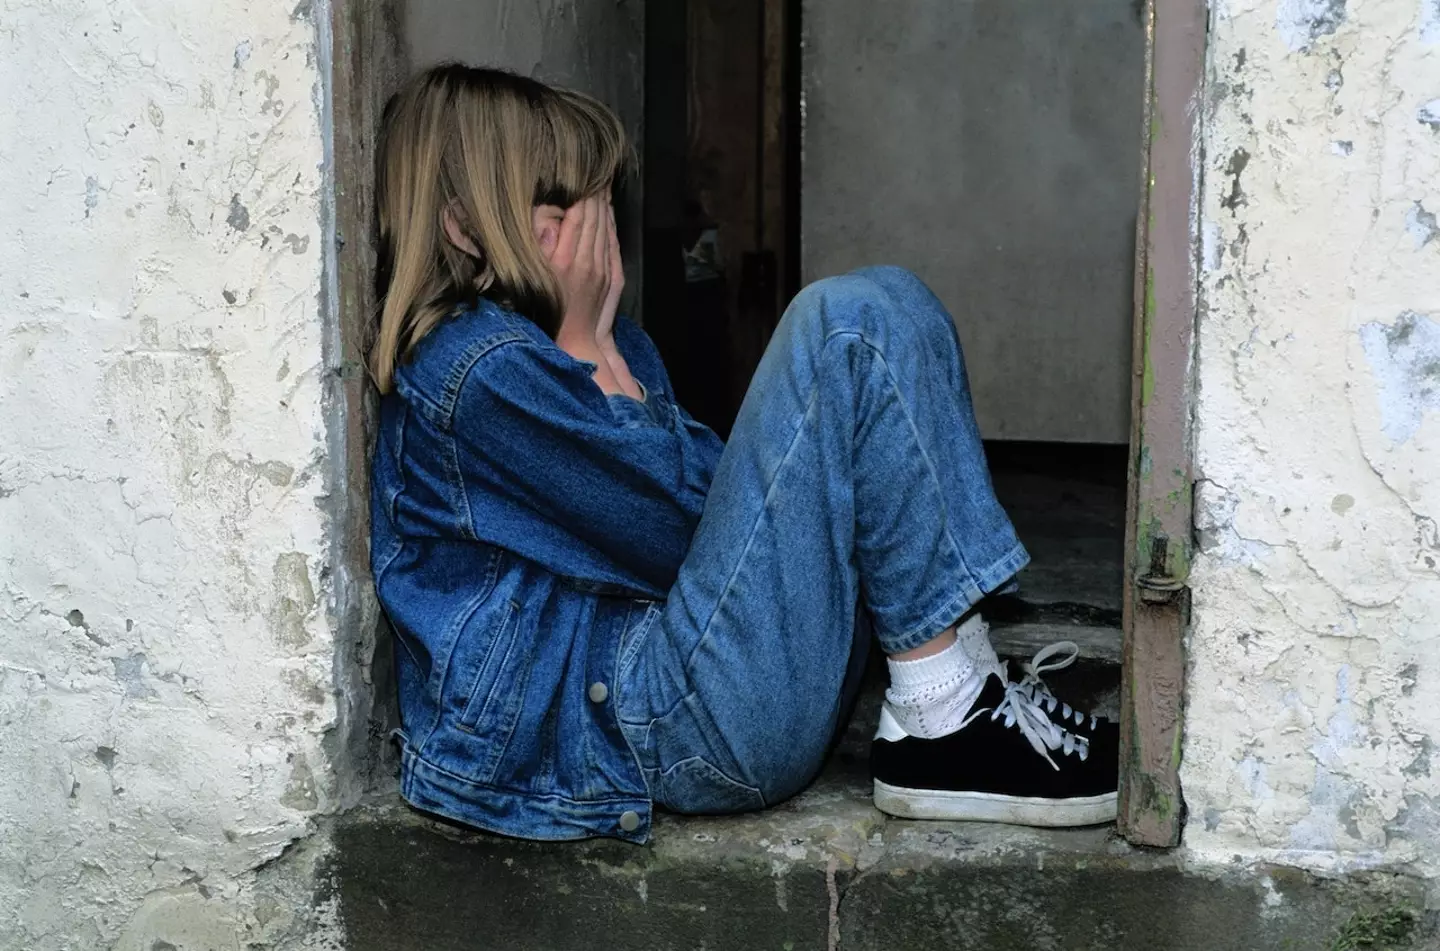 Half a million children a year suffer abuse in the UK.